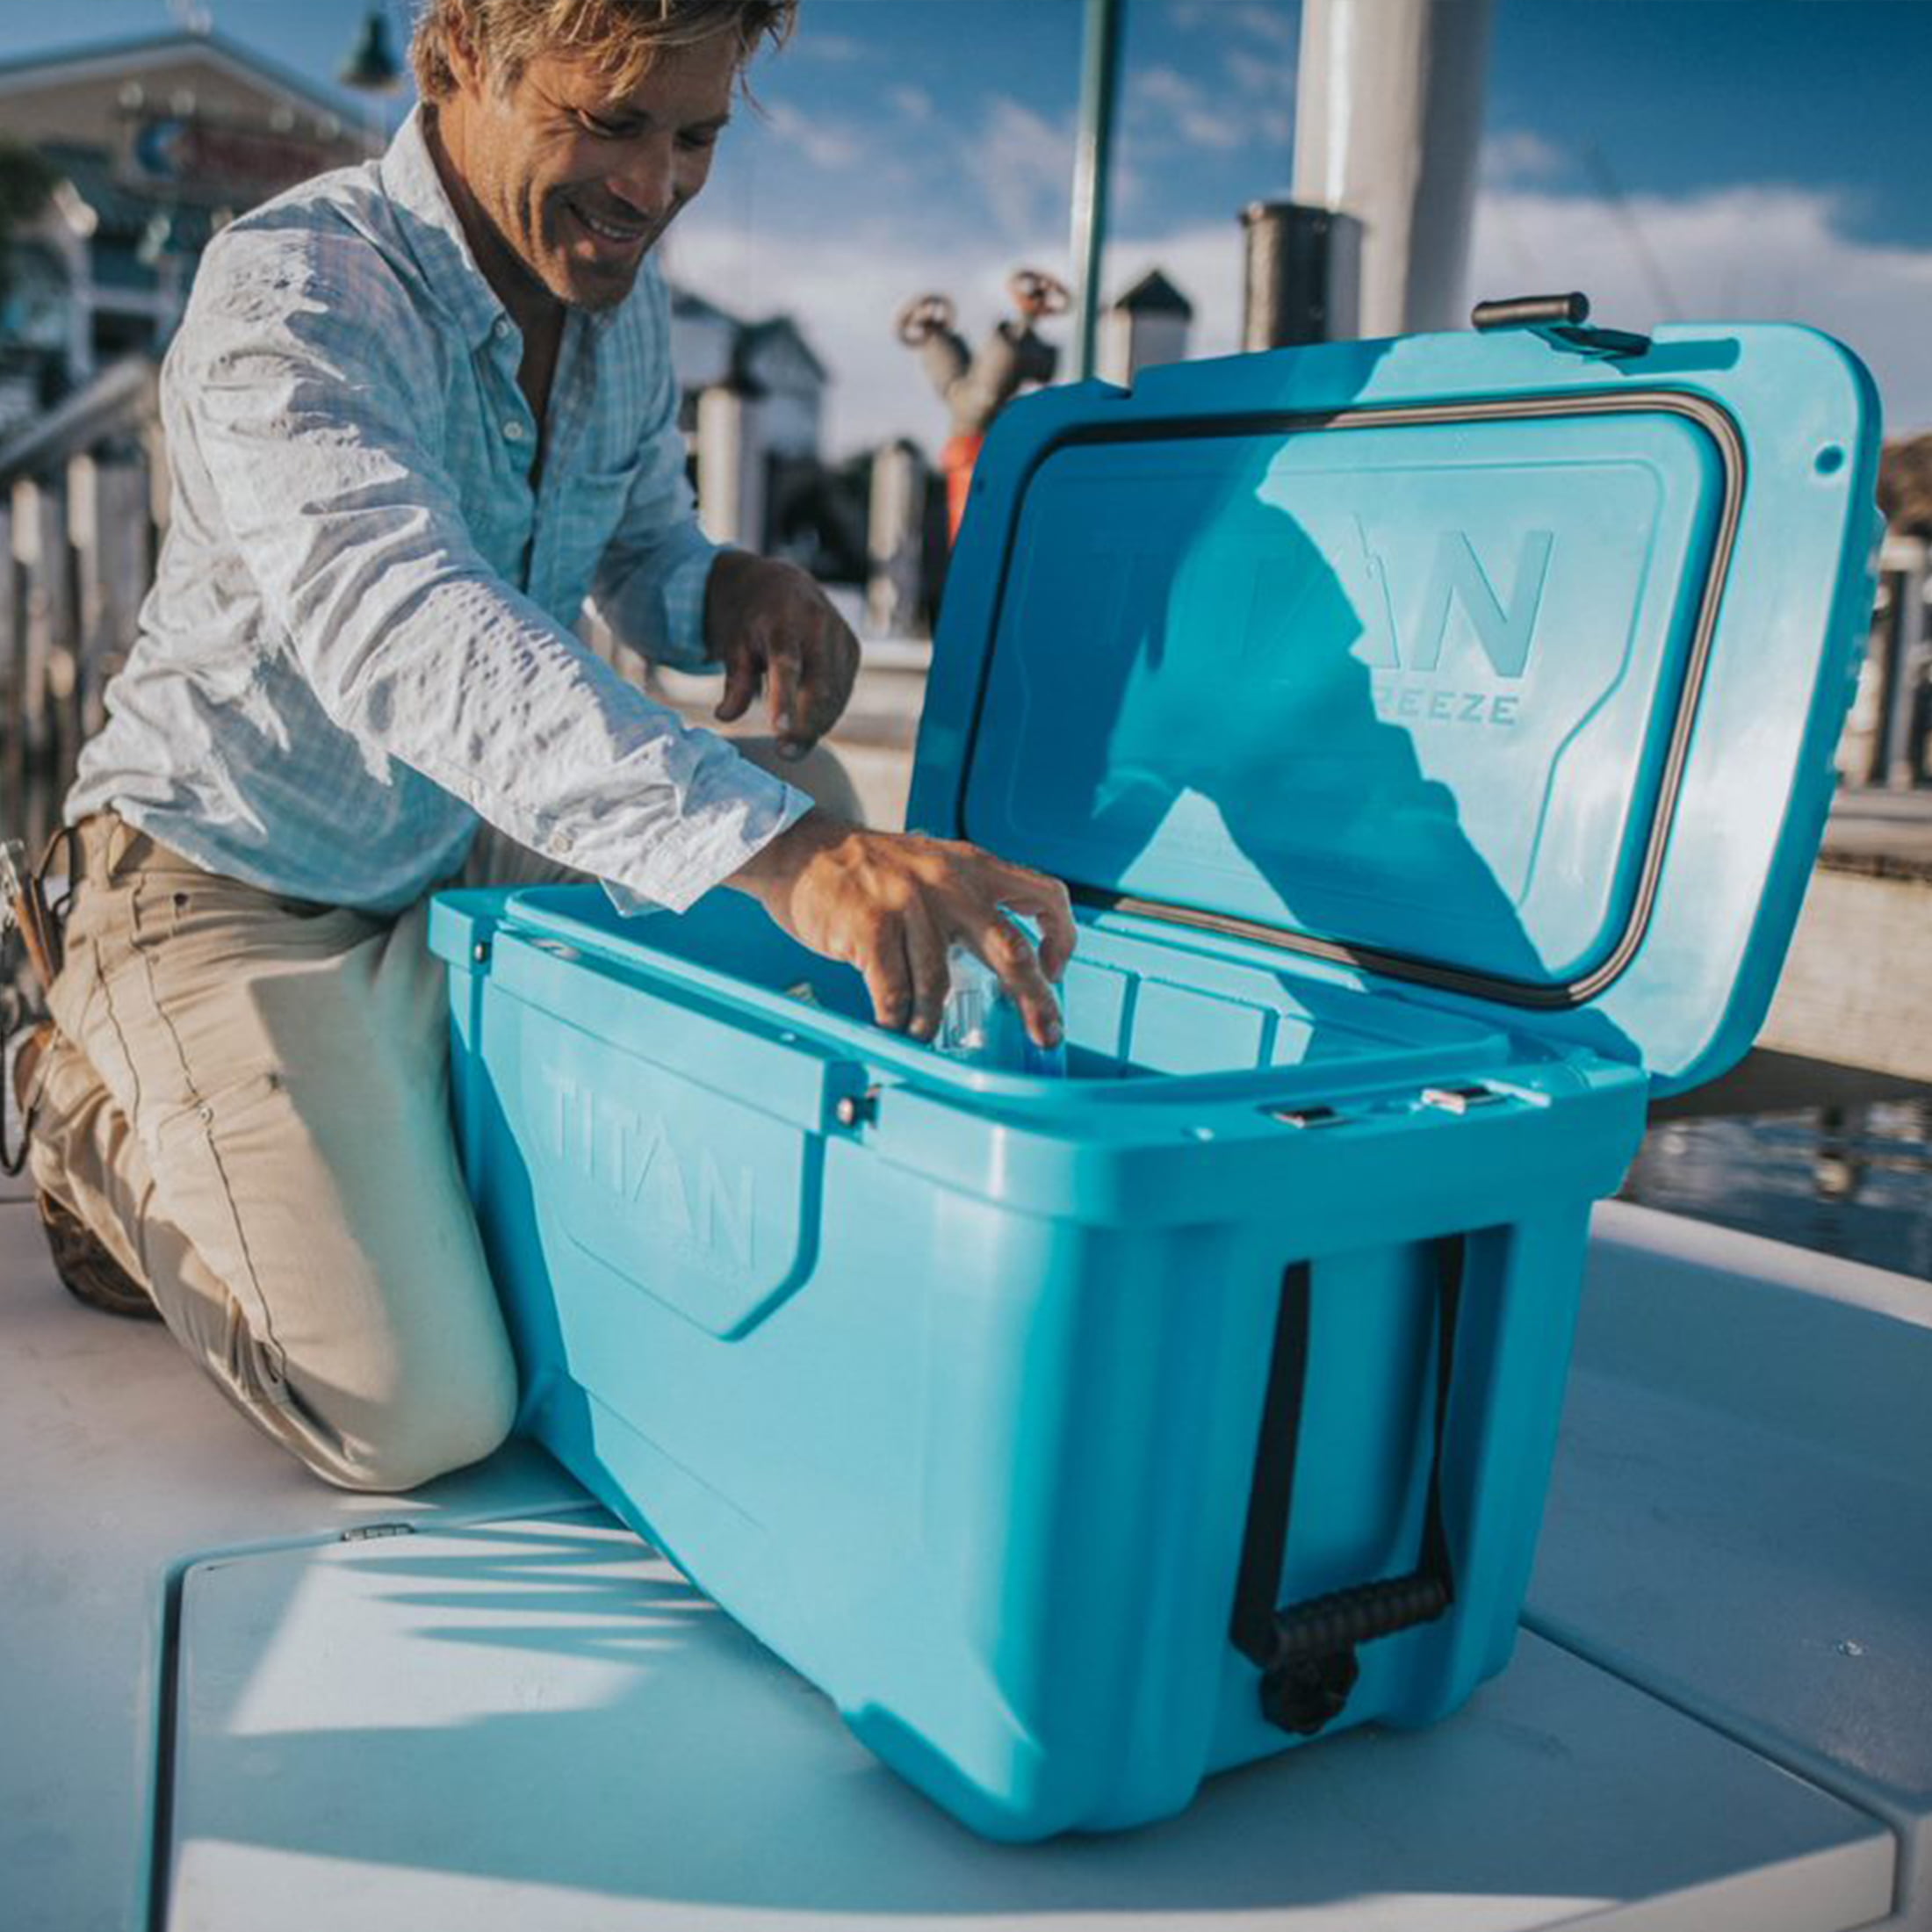 YETI Cooler - perfect fit in your raft. Blue Ridge Mountain